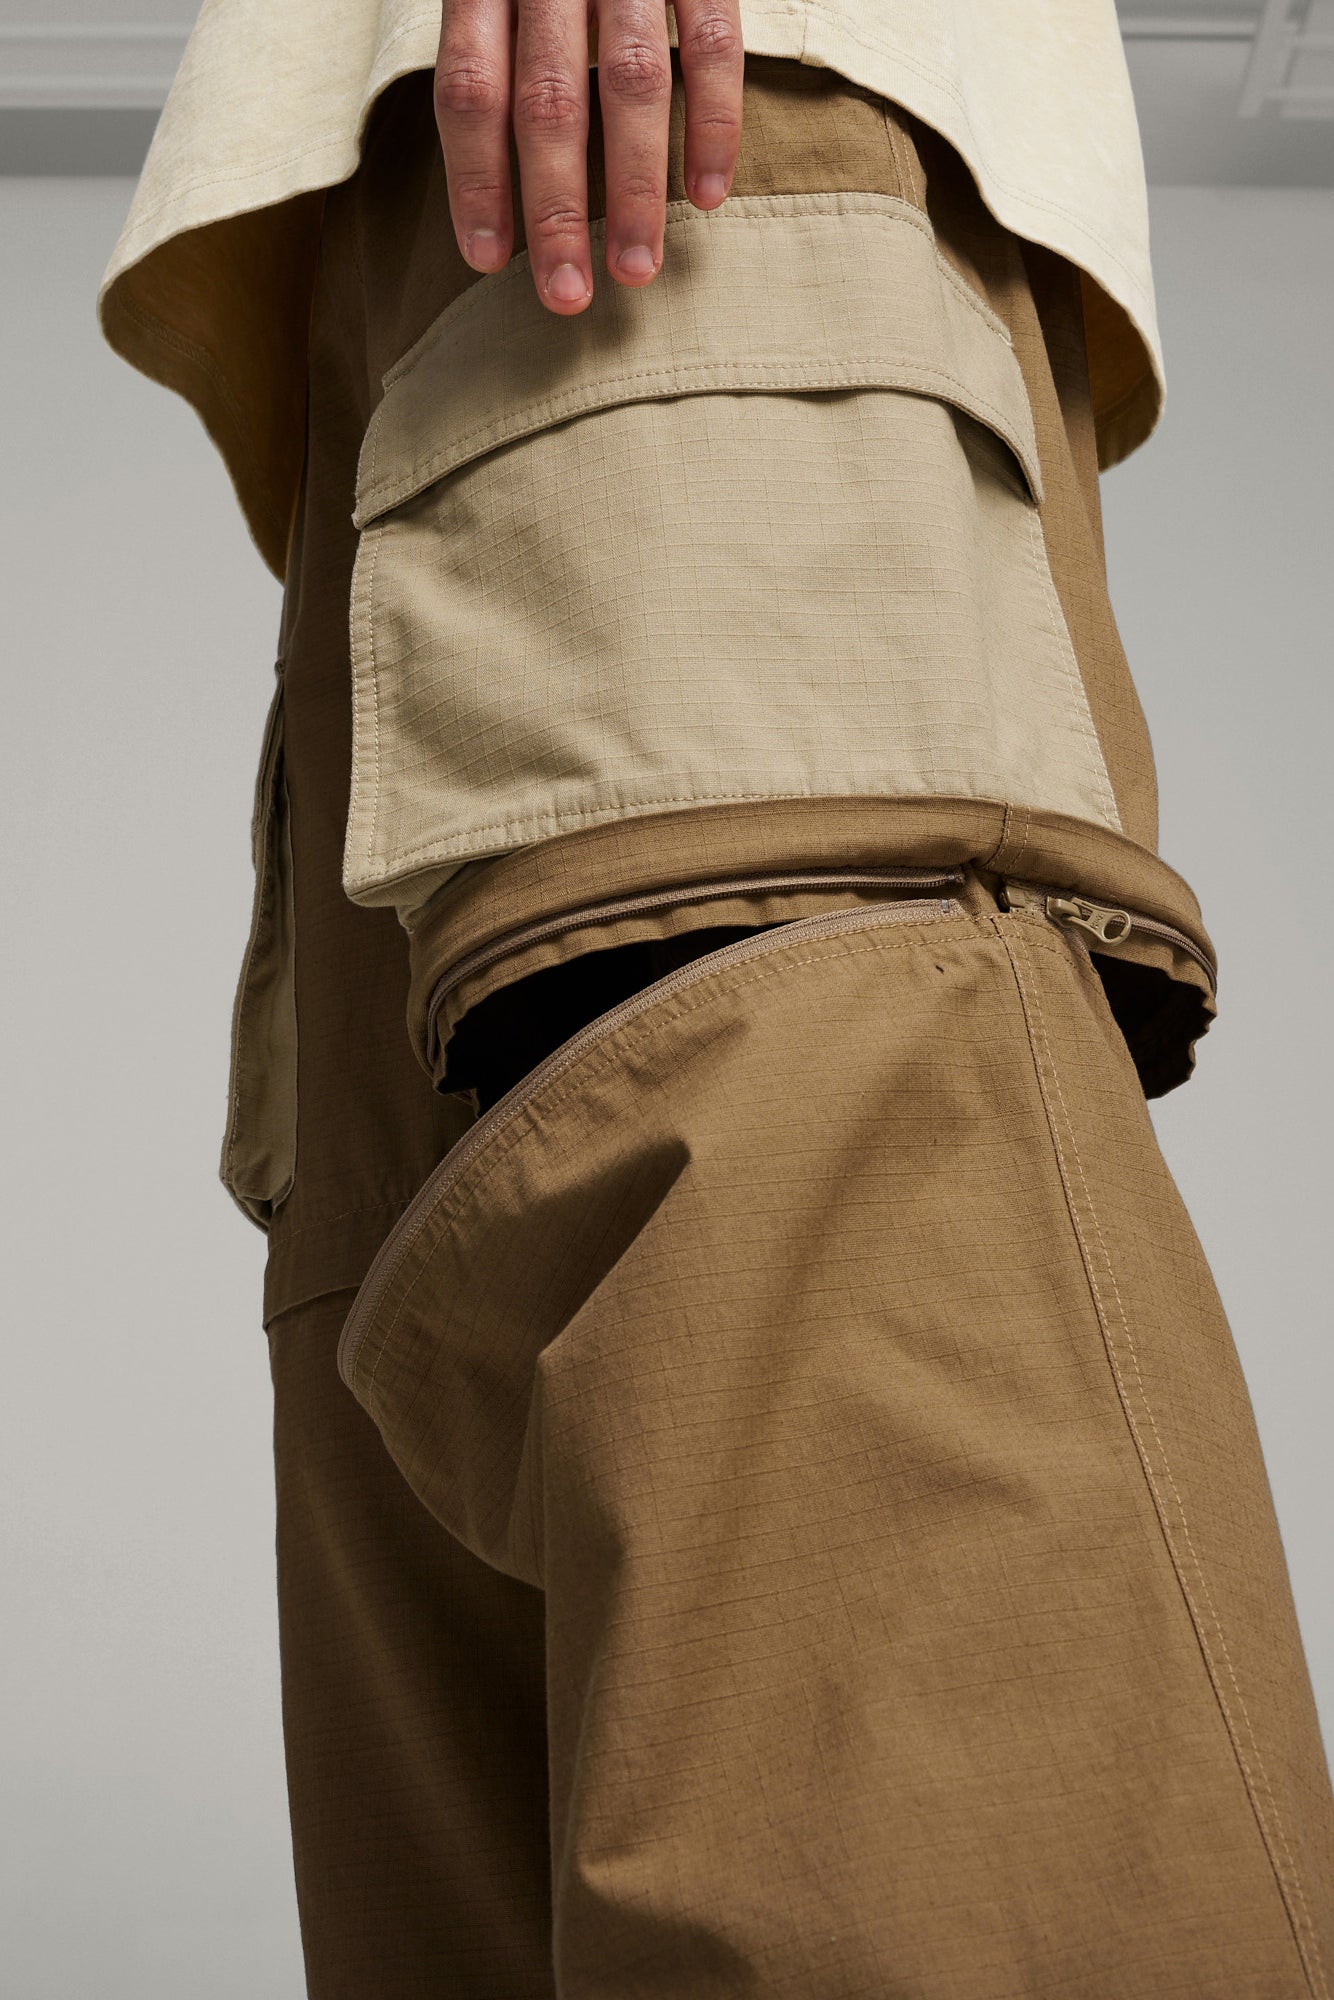 The PUMA X P.A.M. ZIP OFF PANTS  available online with global shipping, and in PAM Stores Melbourne and Sydney.